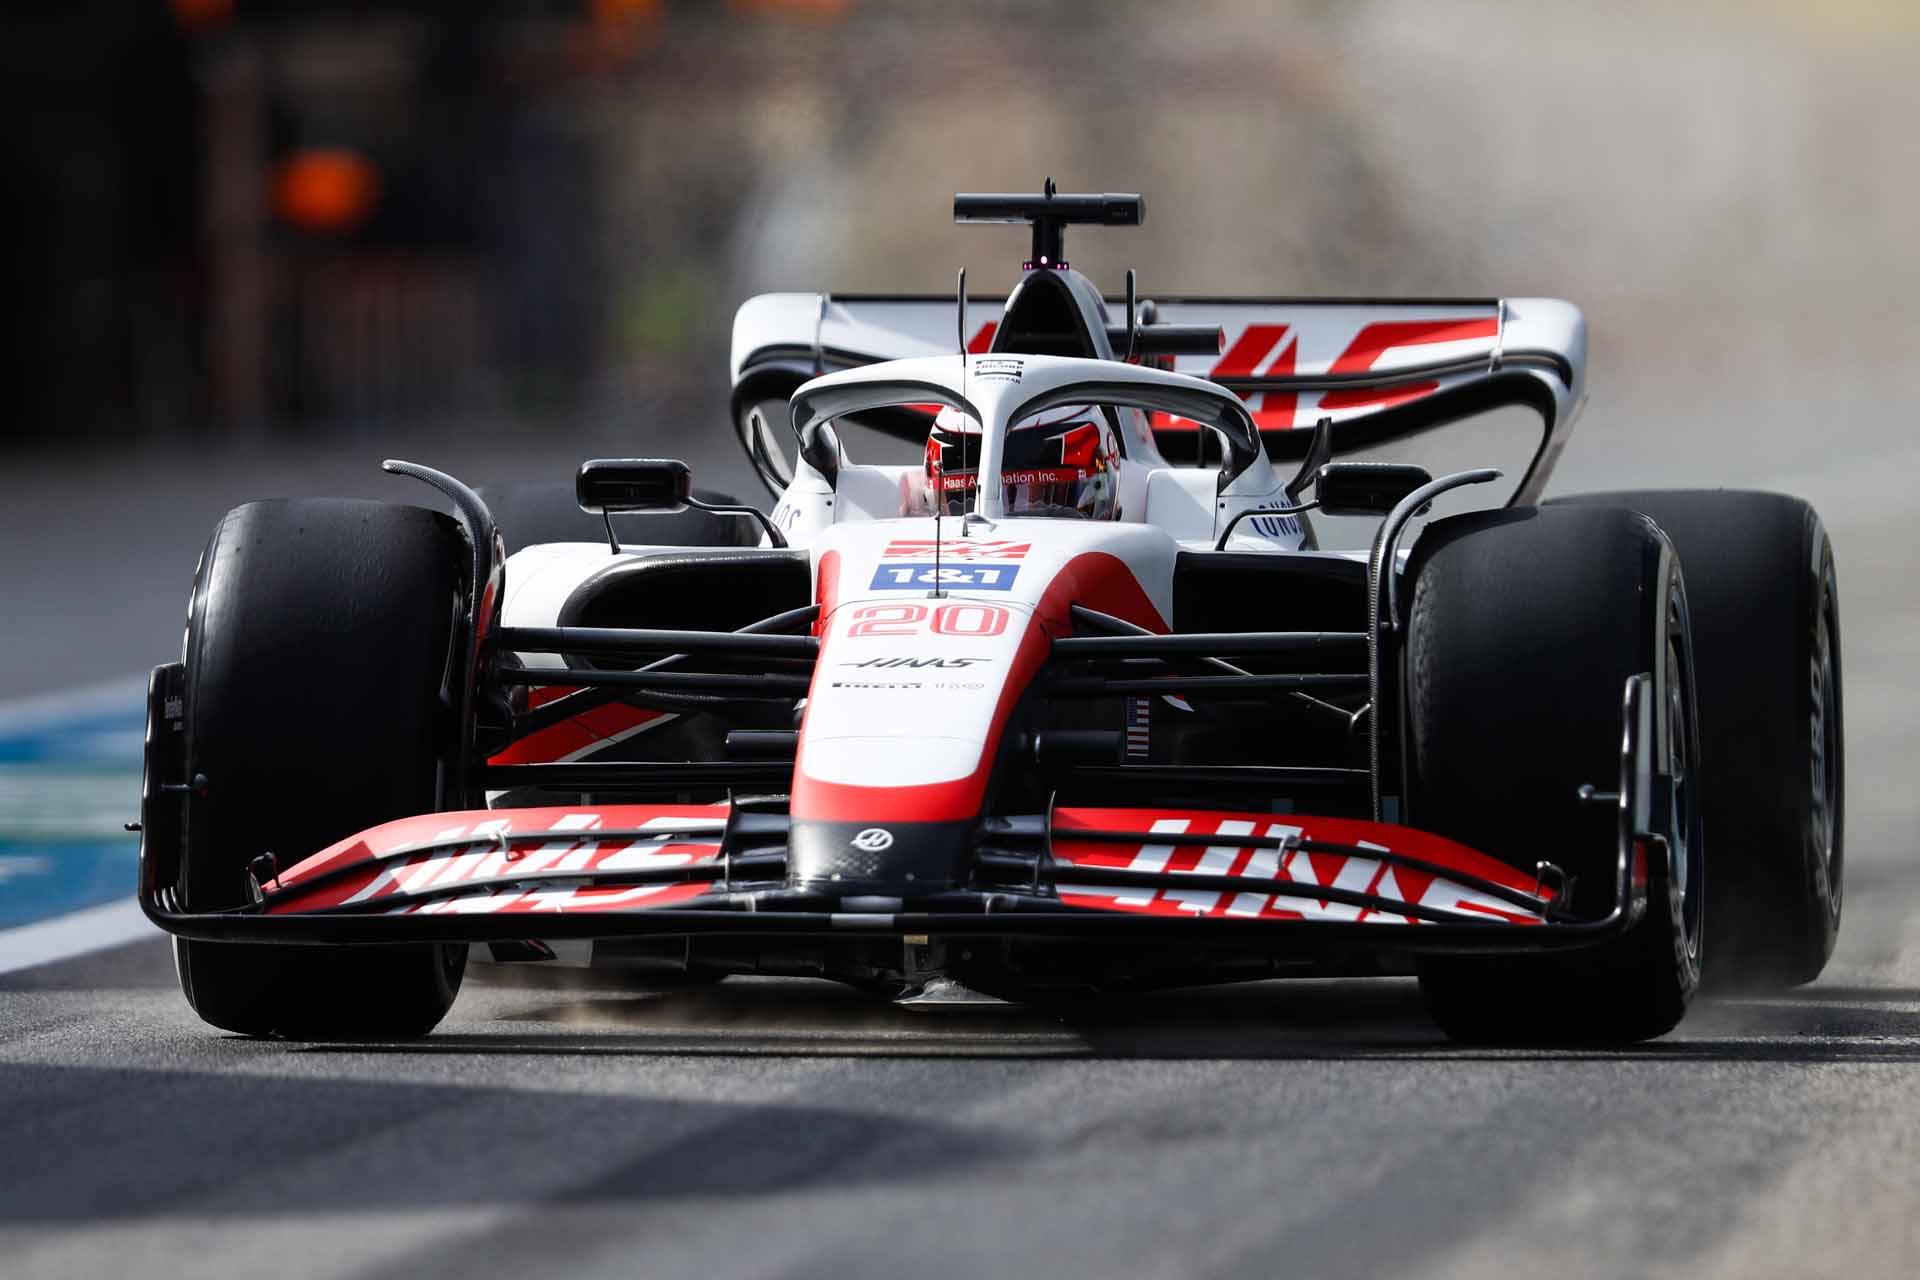 Magnussen: I can't believe what's happening in Haas